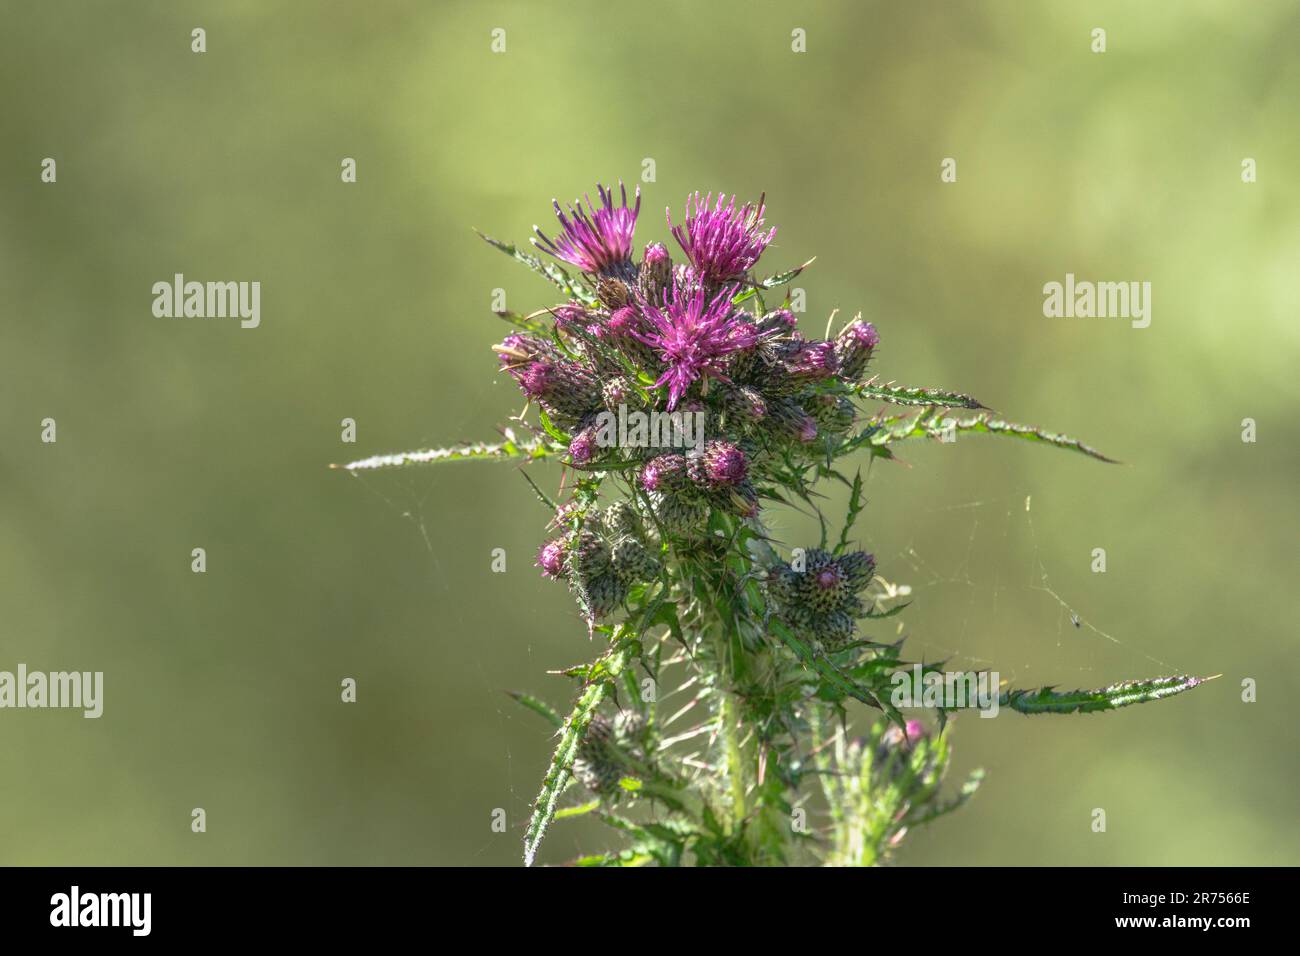 Flowering head of the Marsh Thistle / Cirsium palustre, the stem of which is edible. Possible metaphor for pain / painful / sharp, also marshy ground. Stock Photo